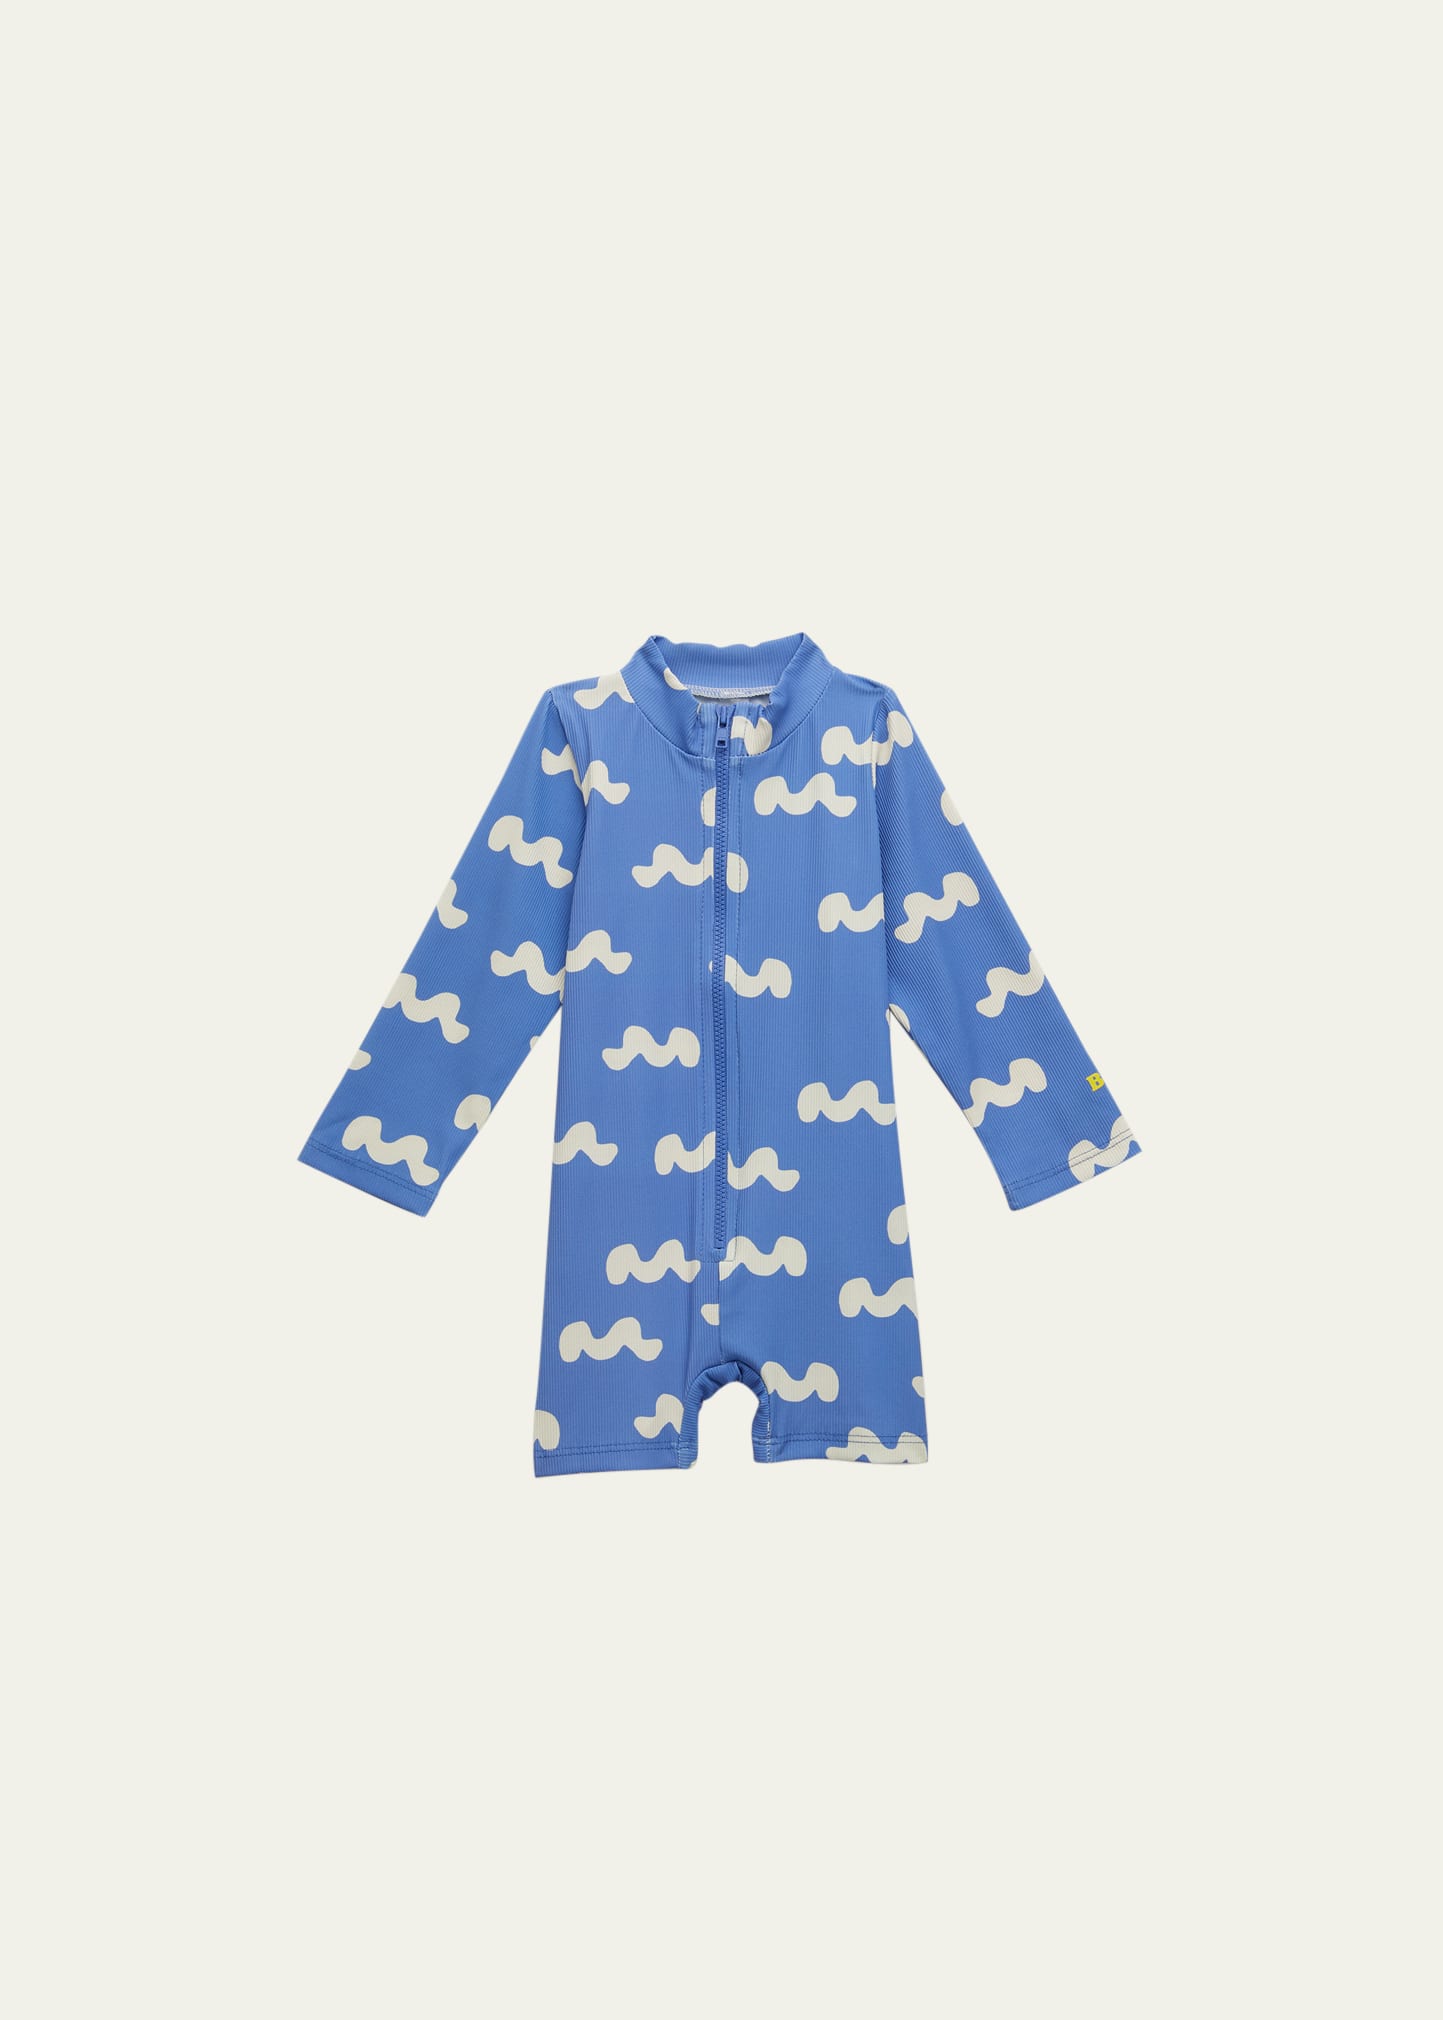 Bobo Choses Girl's Allover Waves Swim Playsuit, Size 6M-24M